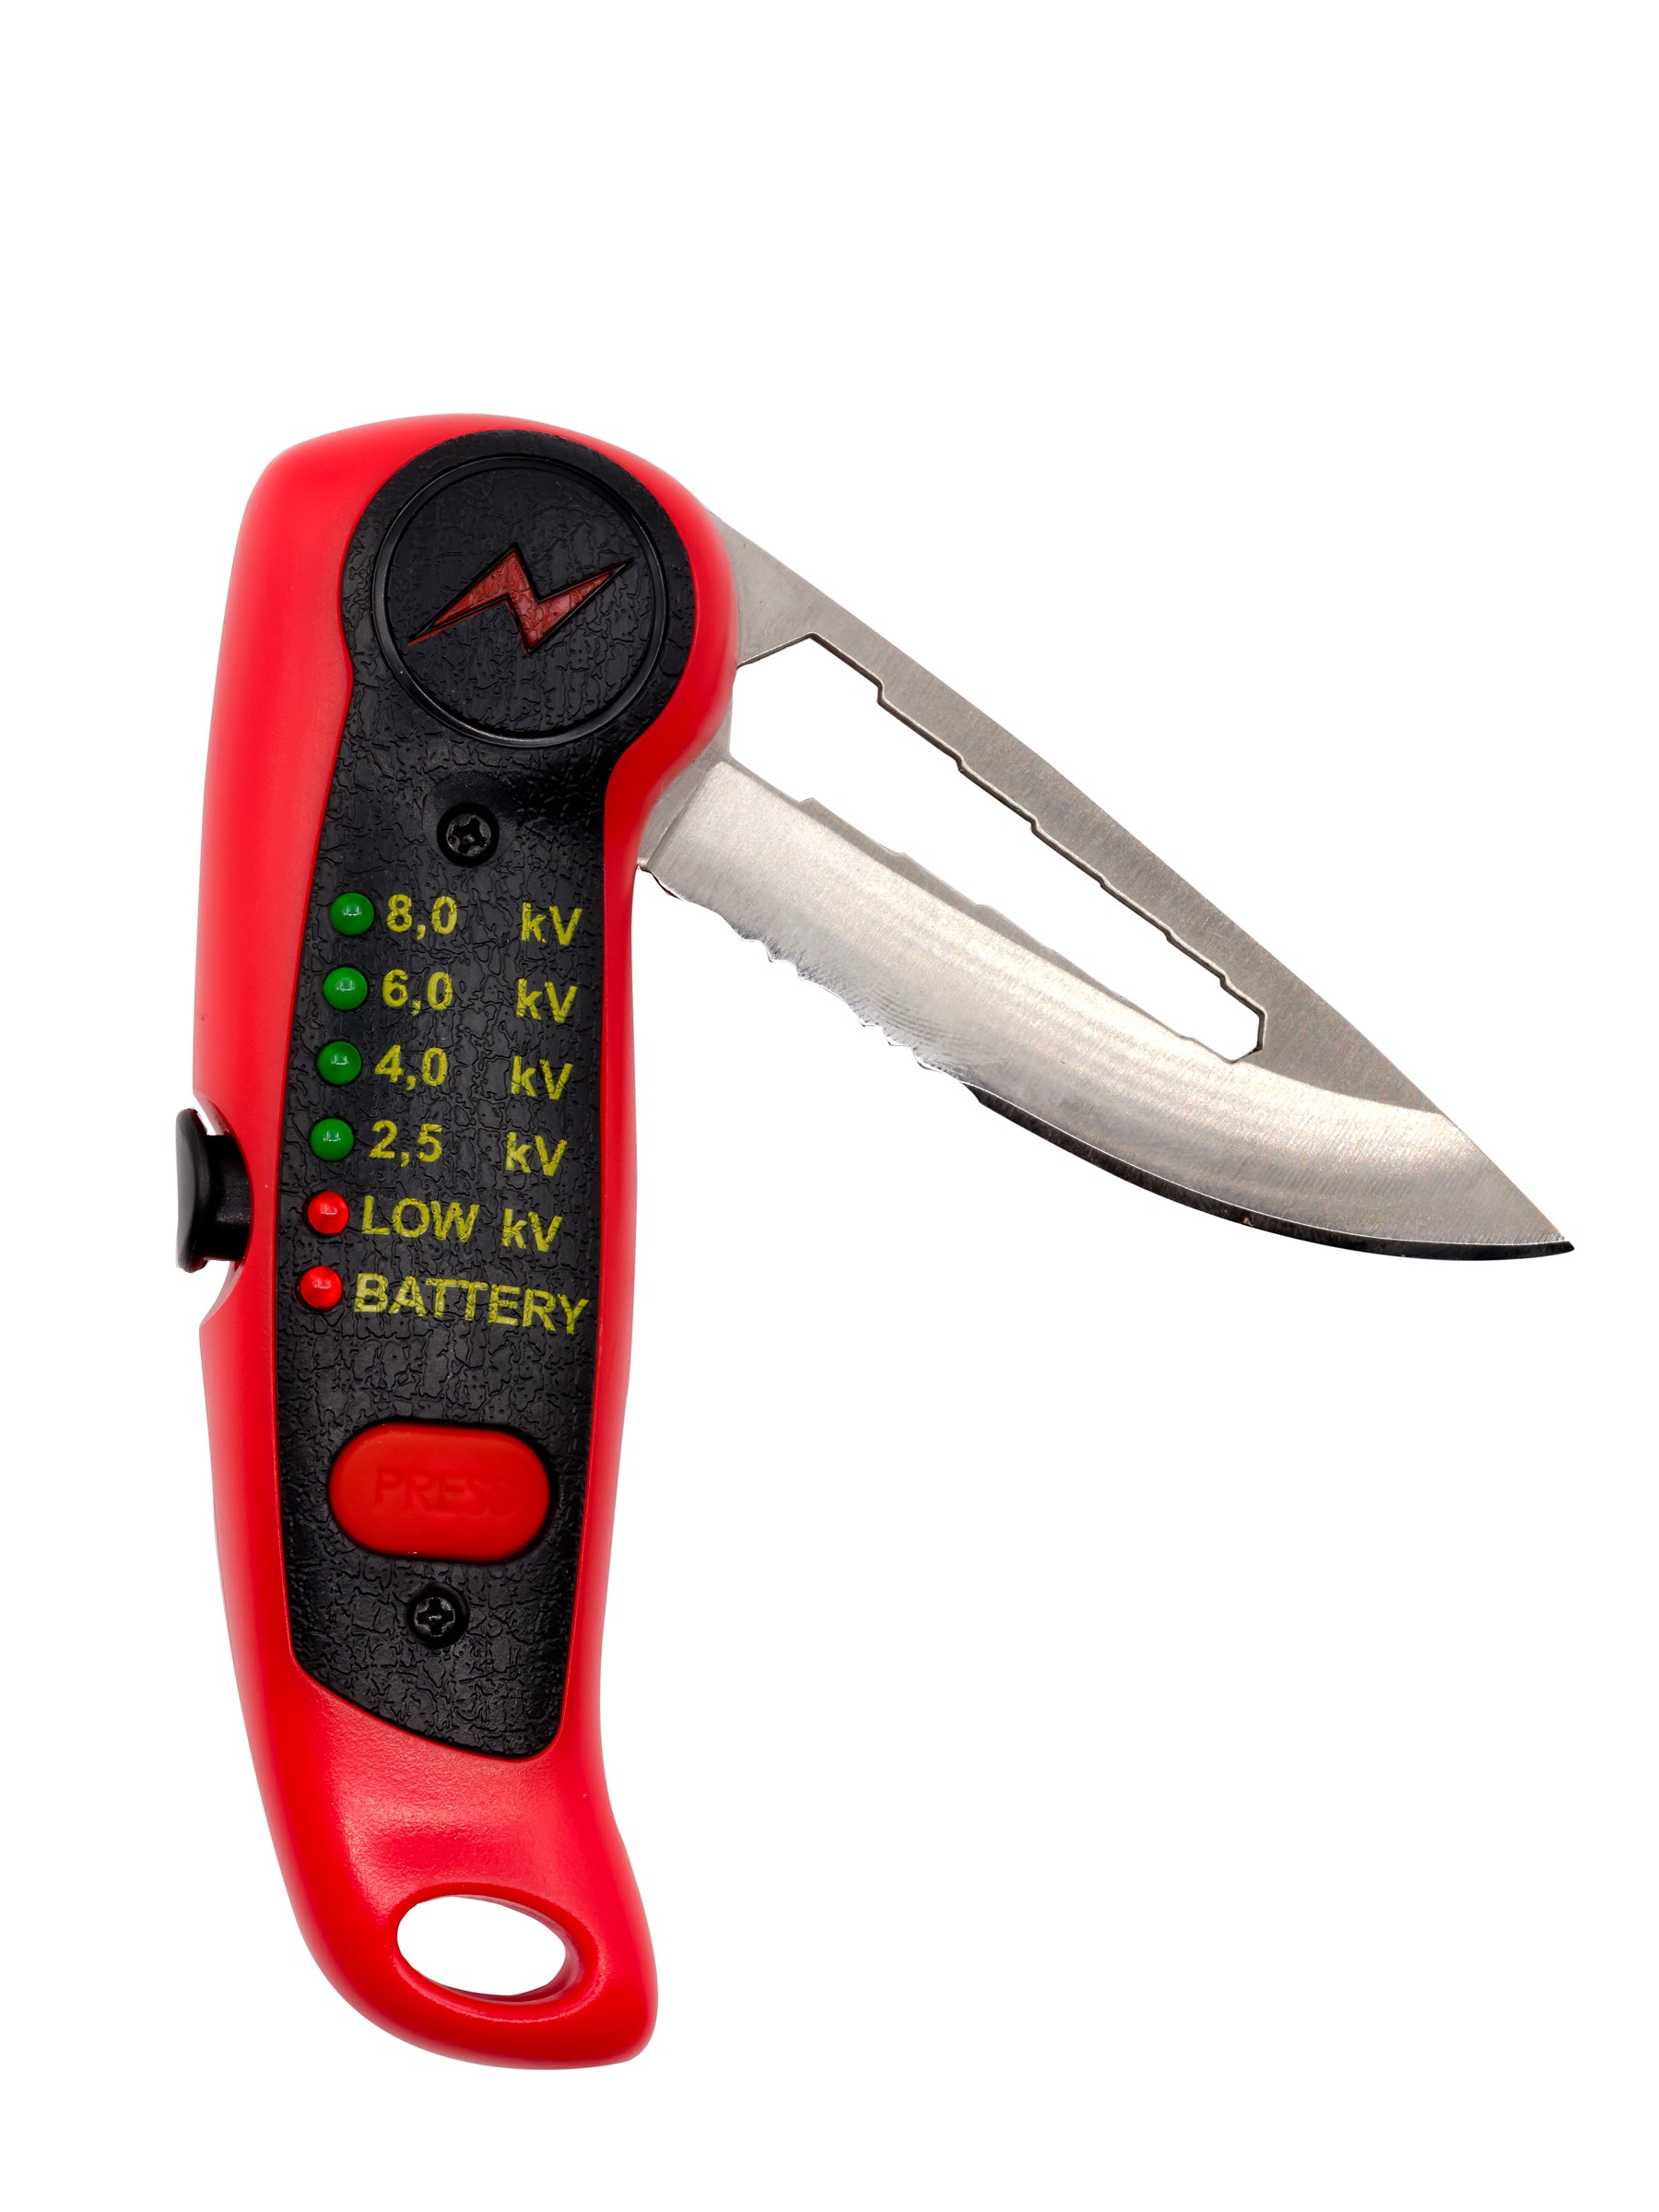 Boundary Blade Electric Fence Tester - Red — TRI Equestrian